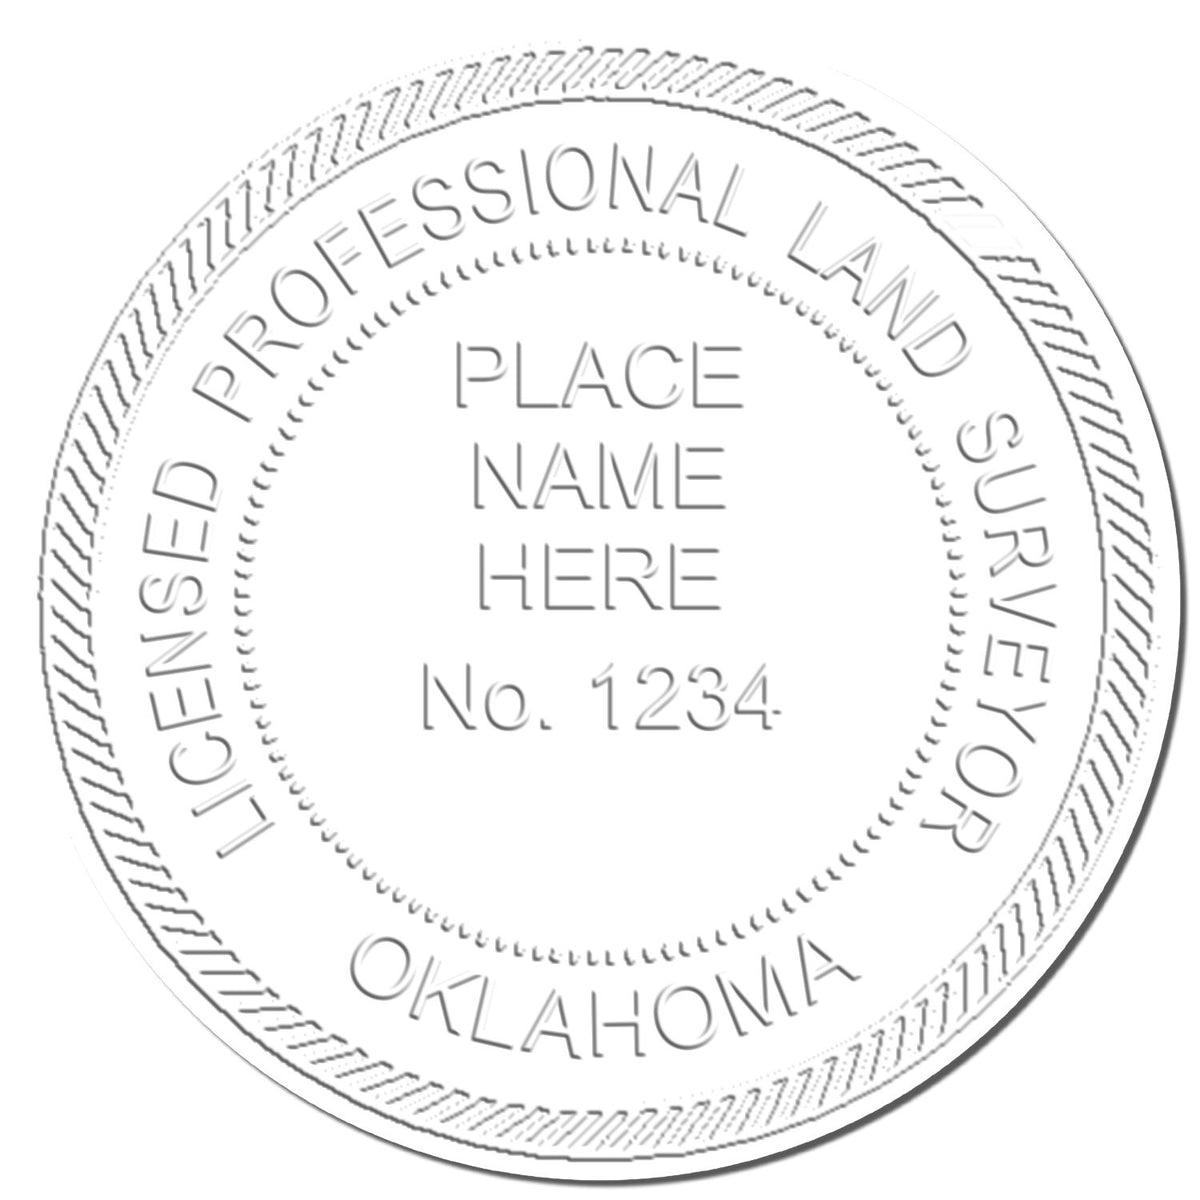 This paper is stamped with a sample imprint of the State of Oklahoma Soft Land Surveyor Embossing Seal, signifying its quality and reliability.